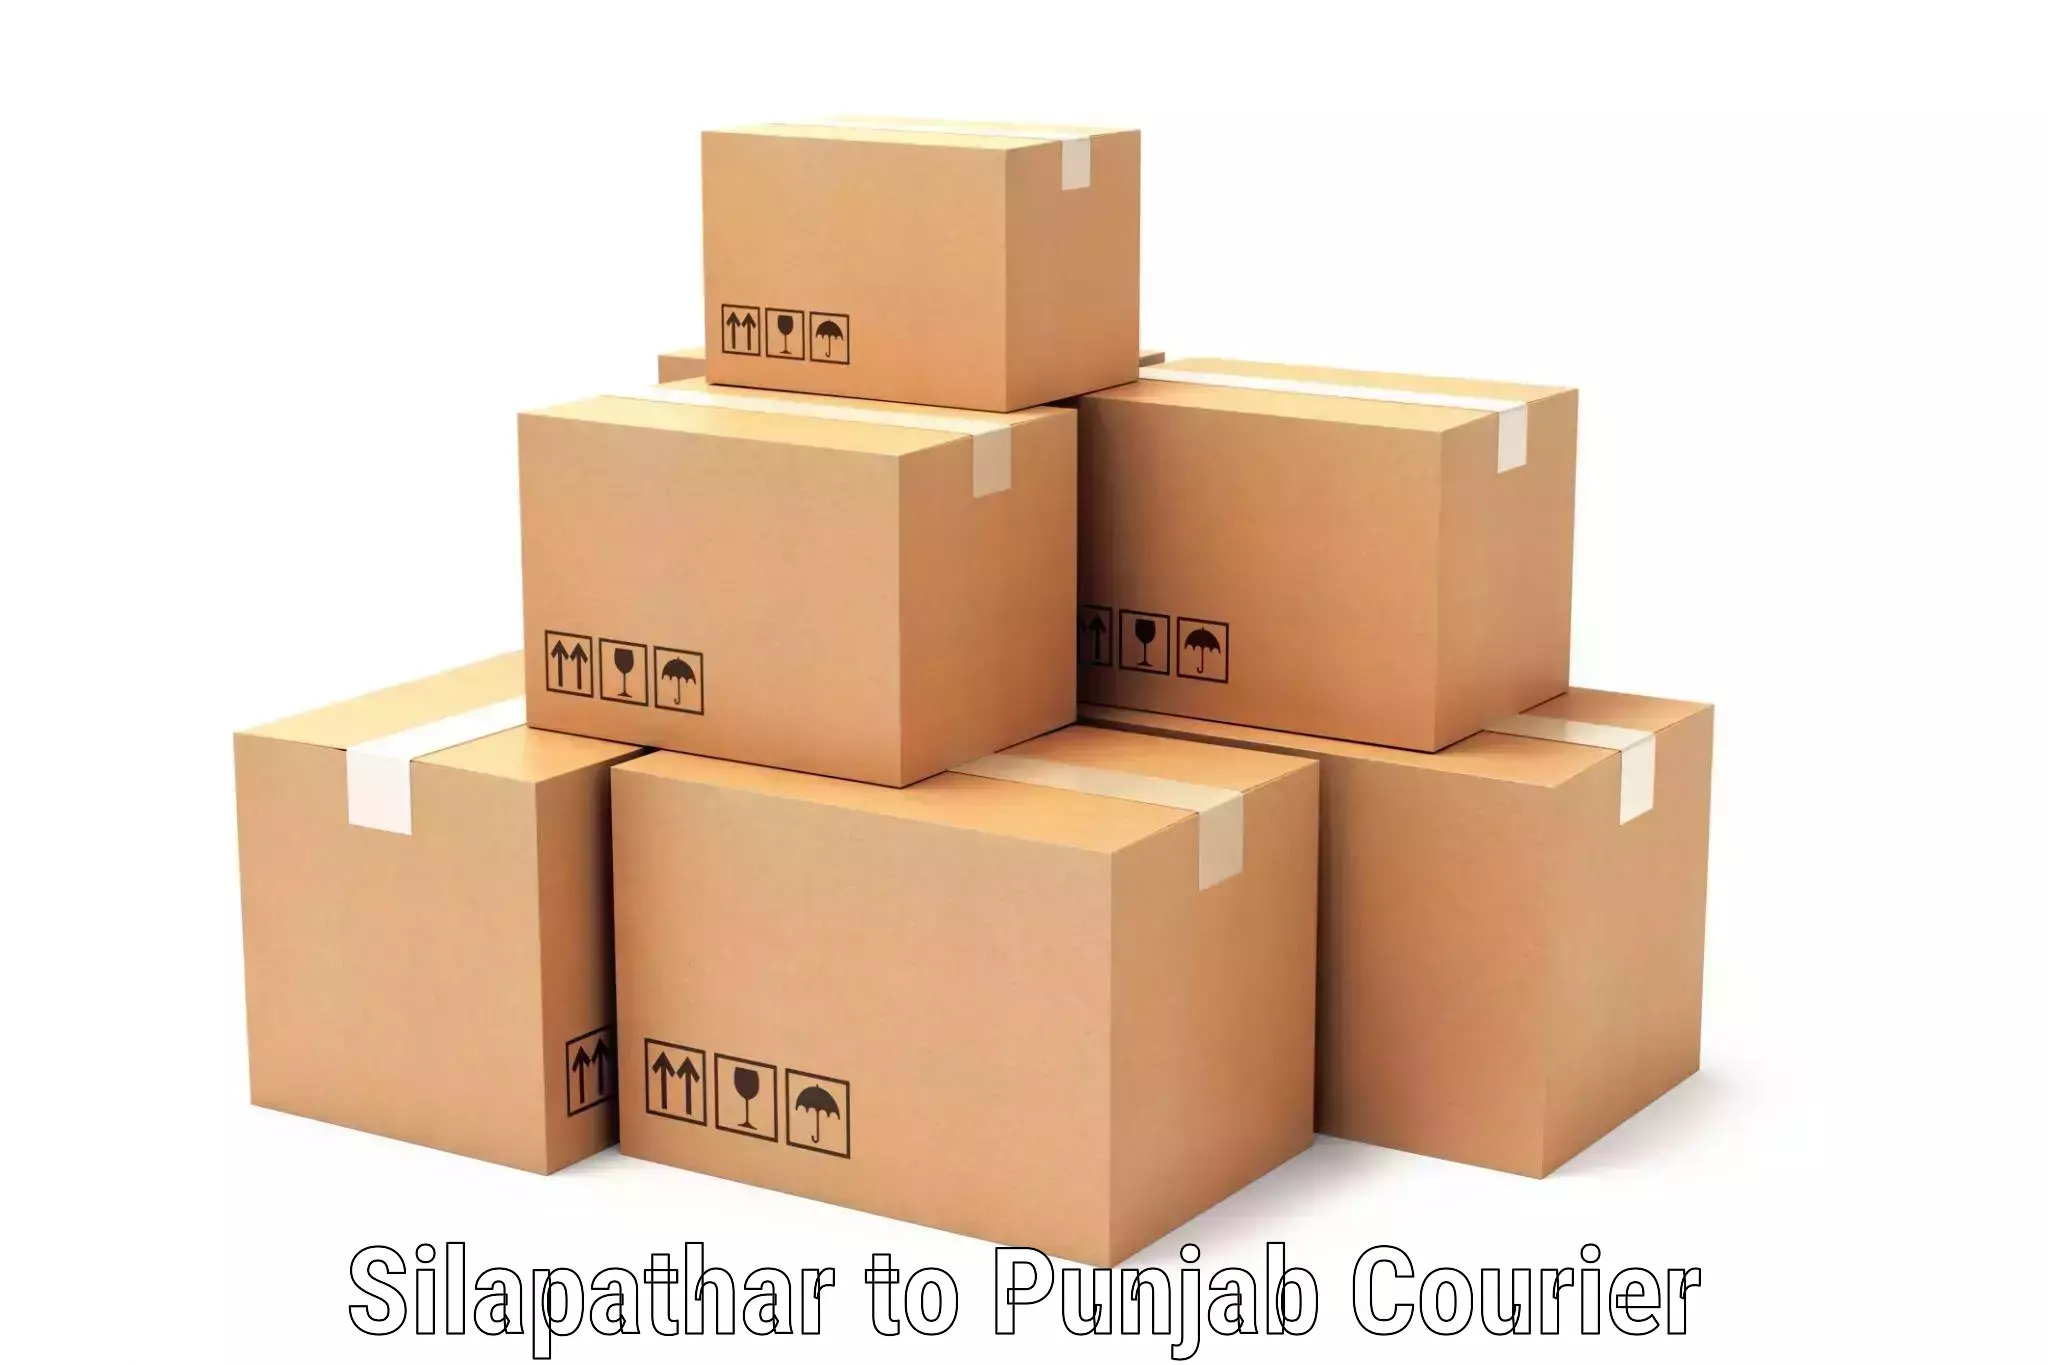 24-hour courier service Silapathar to Zirakpur